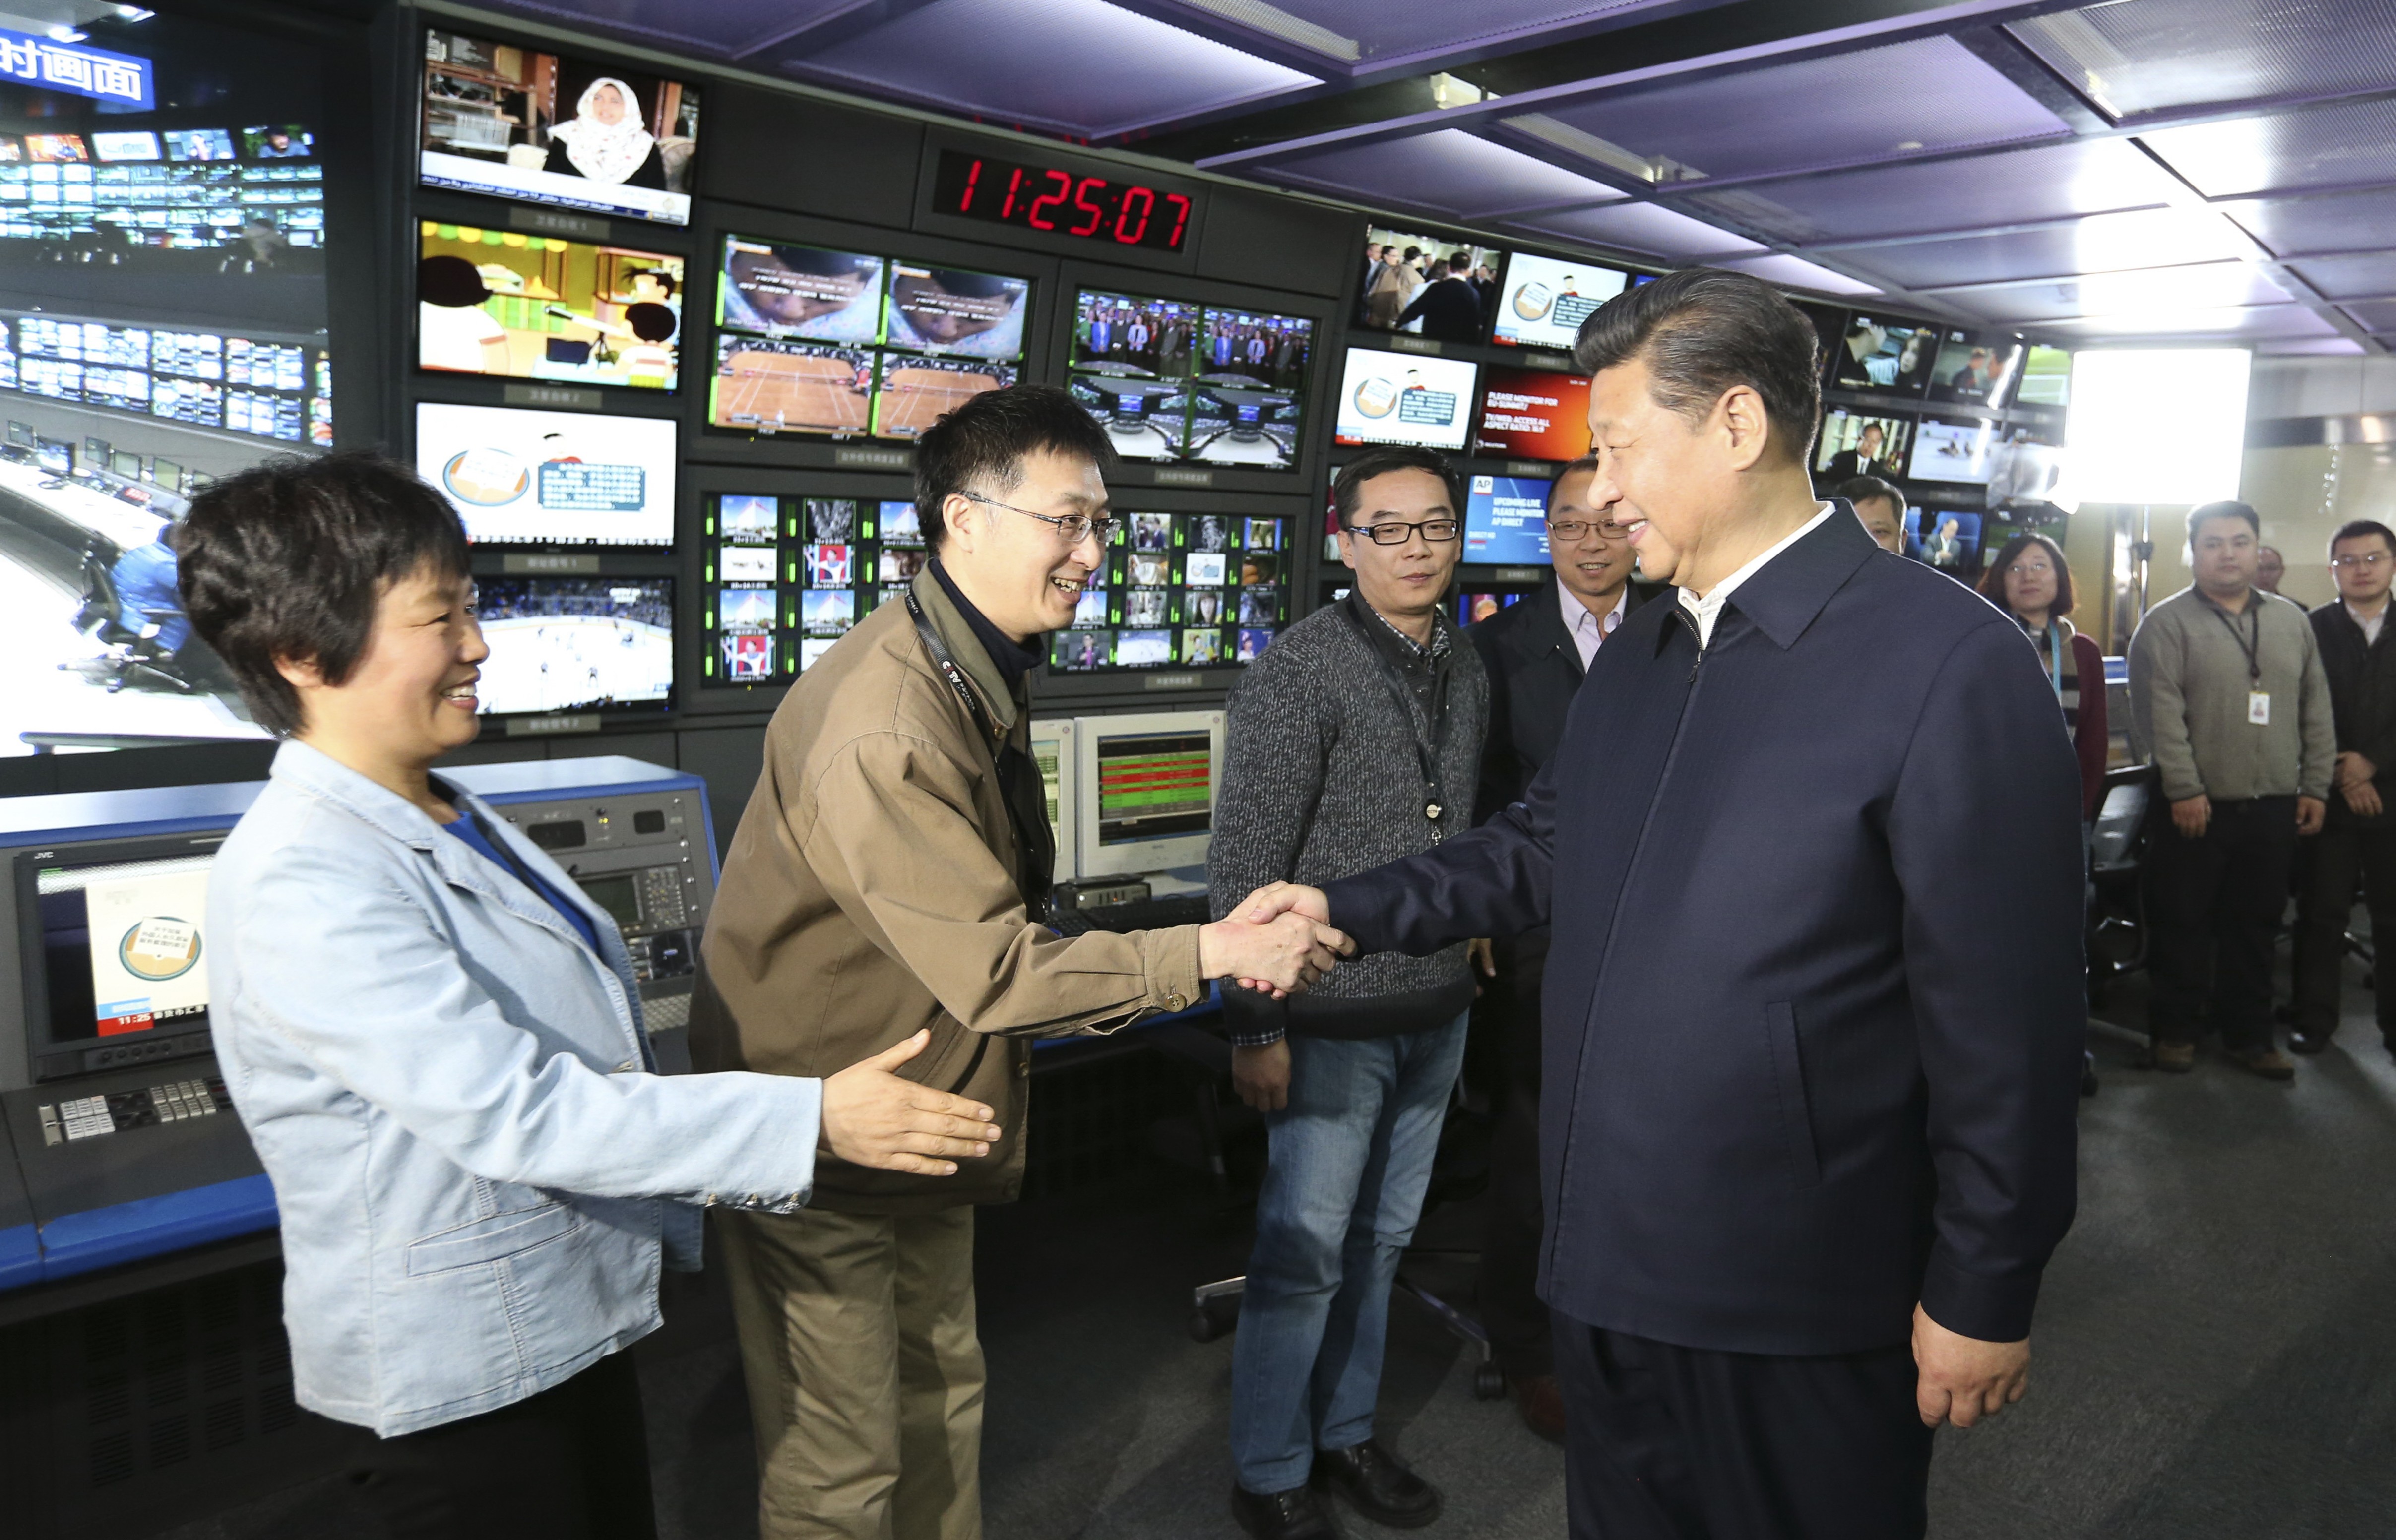 Xi Jinping shakes hands with staff in the control room of China Central Television in Beijing during a high-profile tour of the top three state media outlets in 2016. Photo: Xinhua via AP